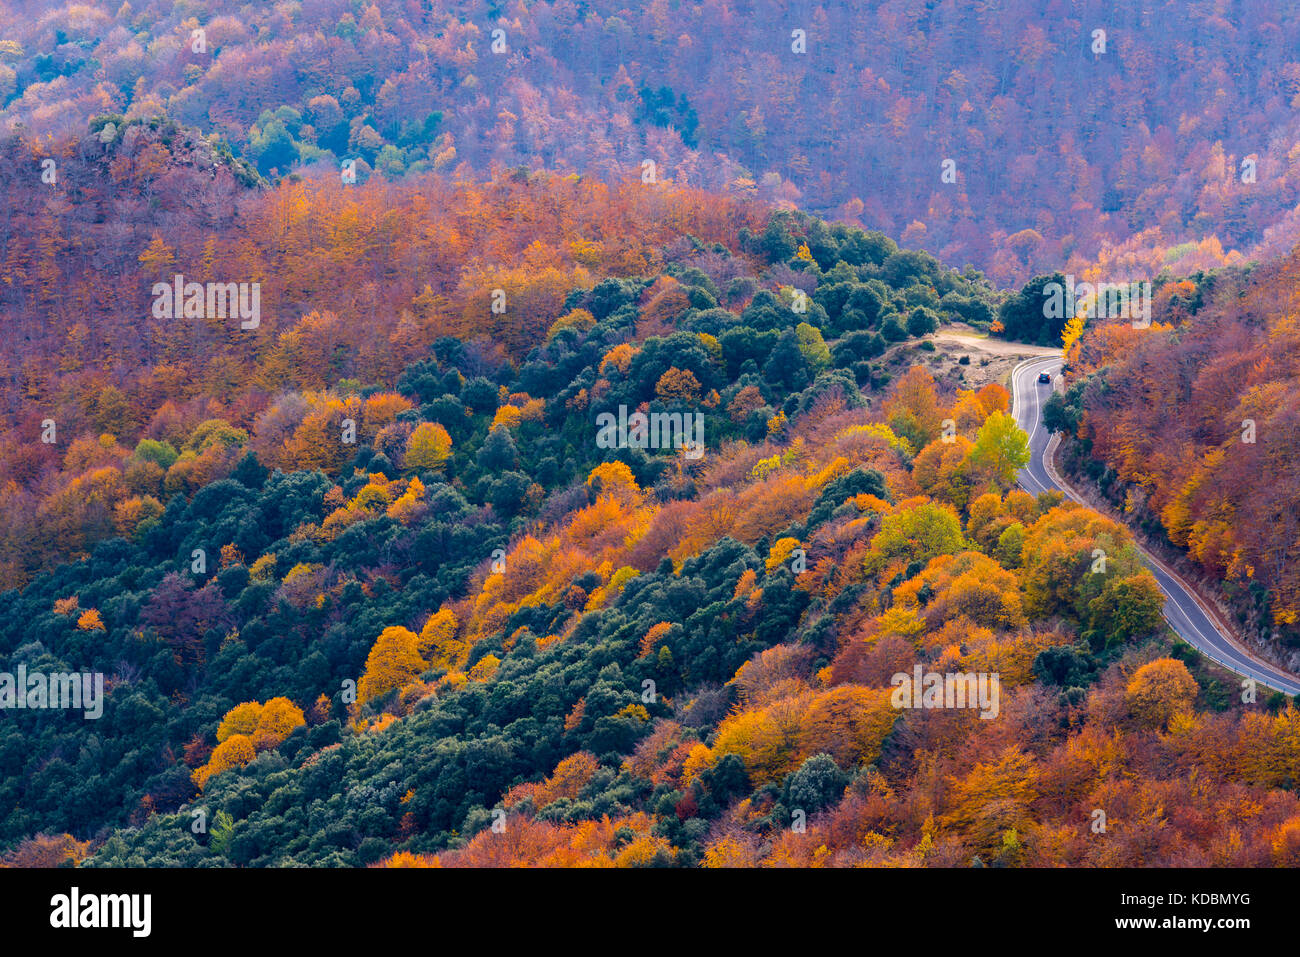 Car crossing a road between the colorful Montseny forest in Autumn Stock Photo